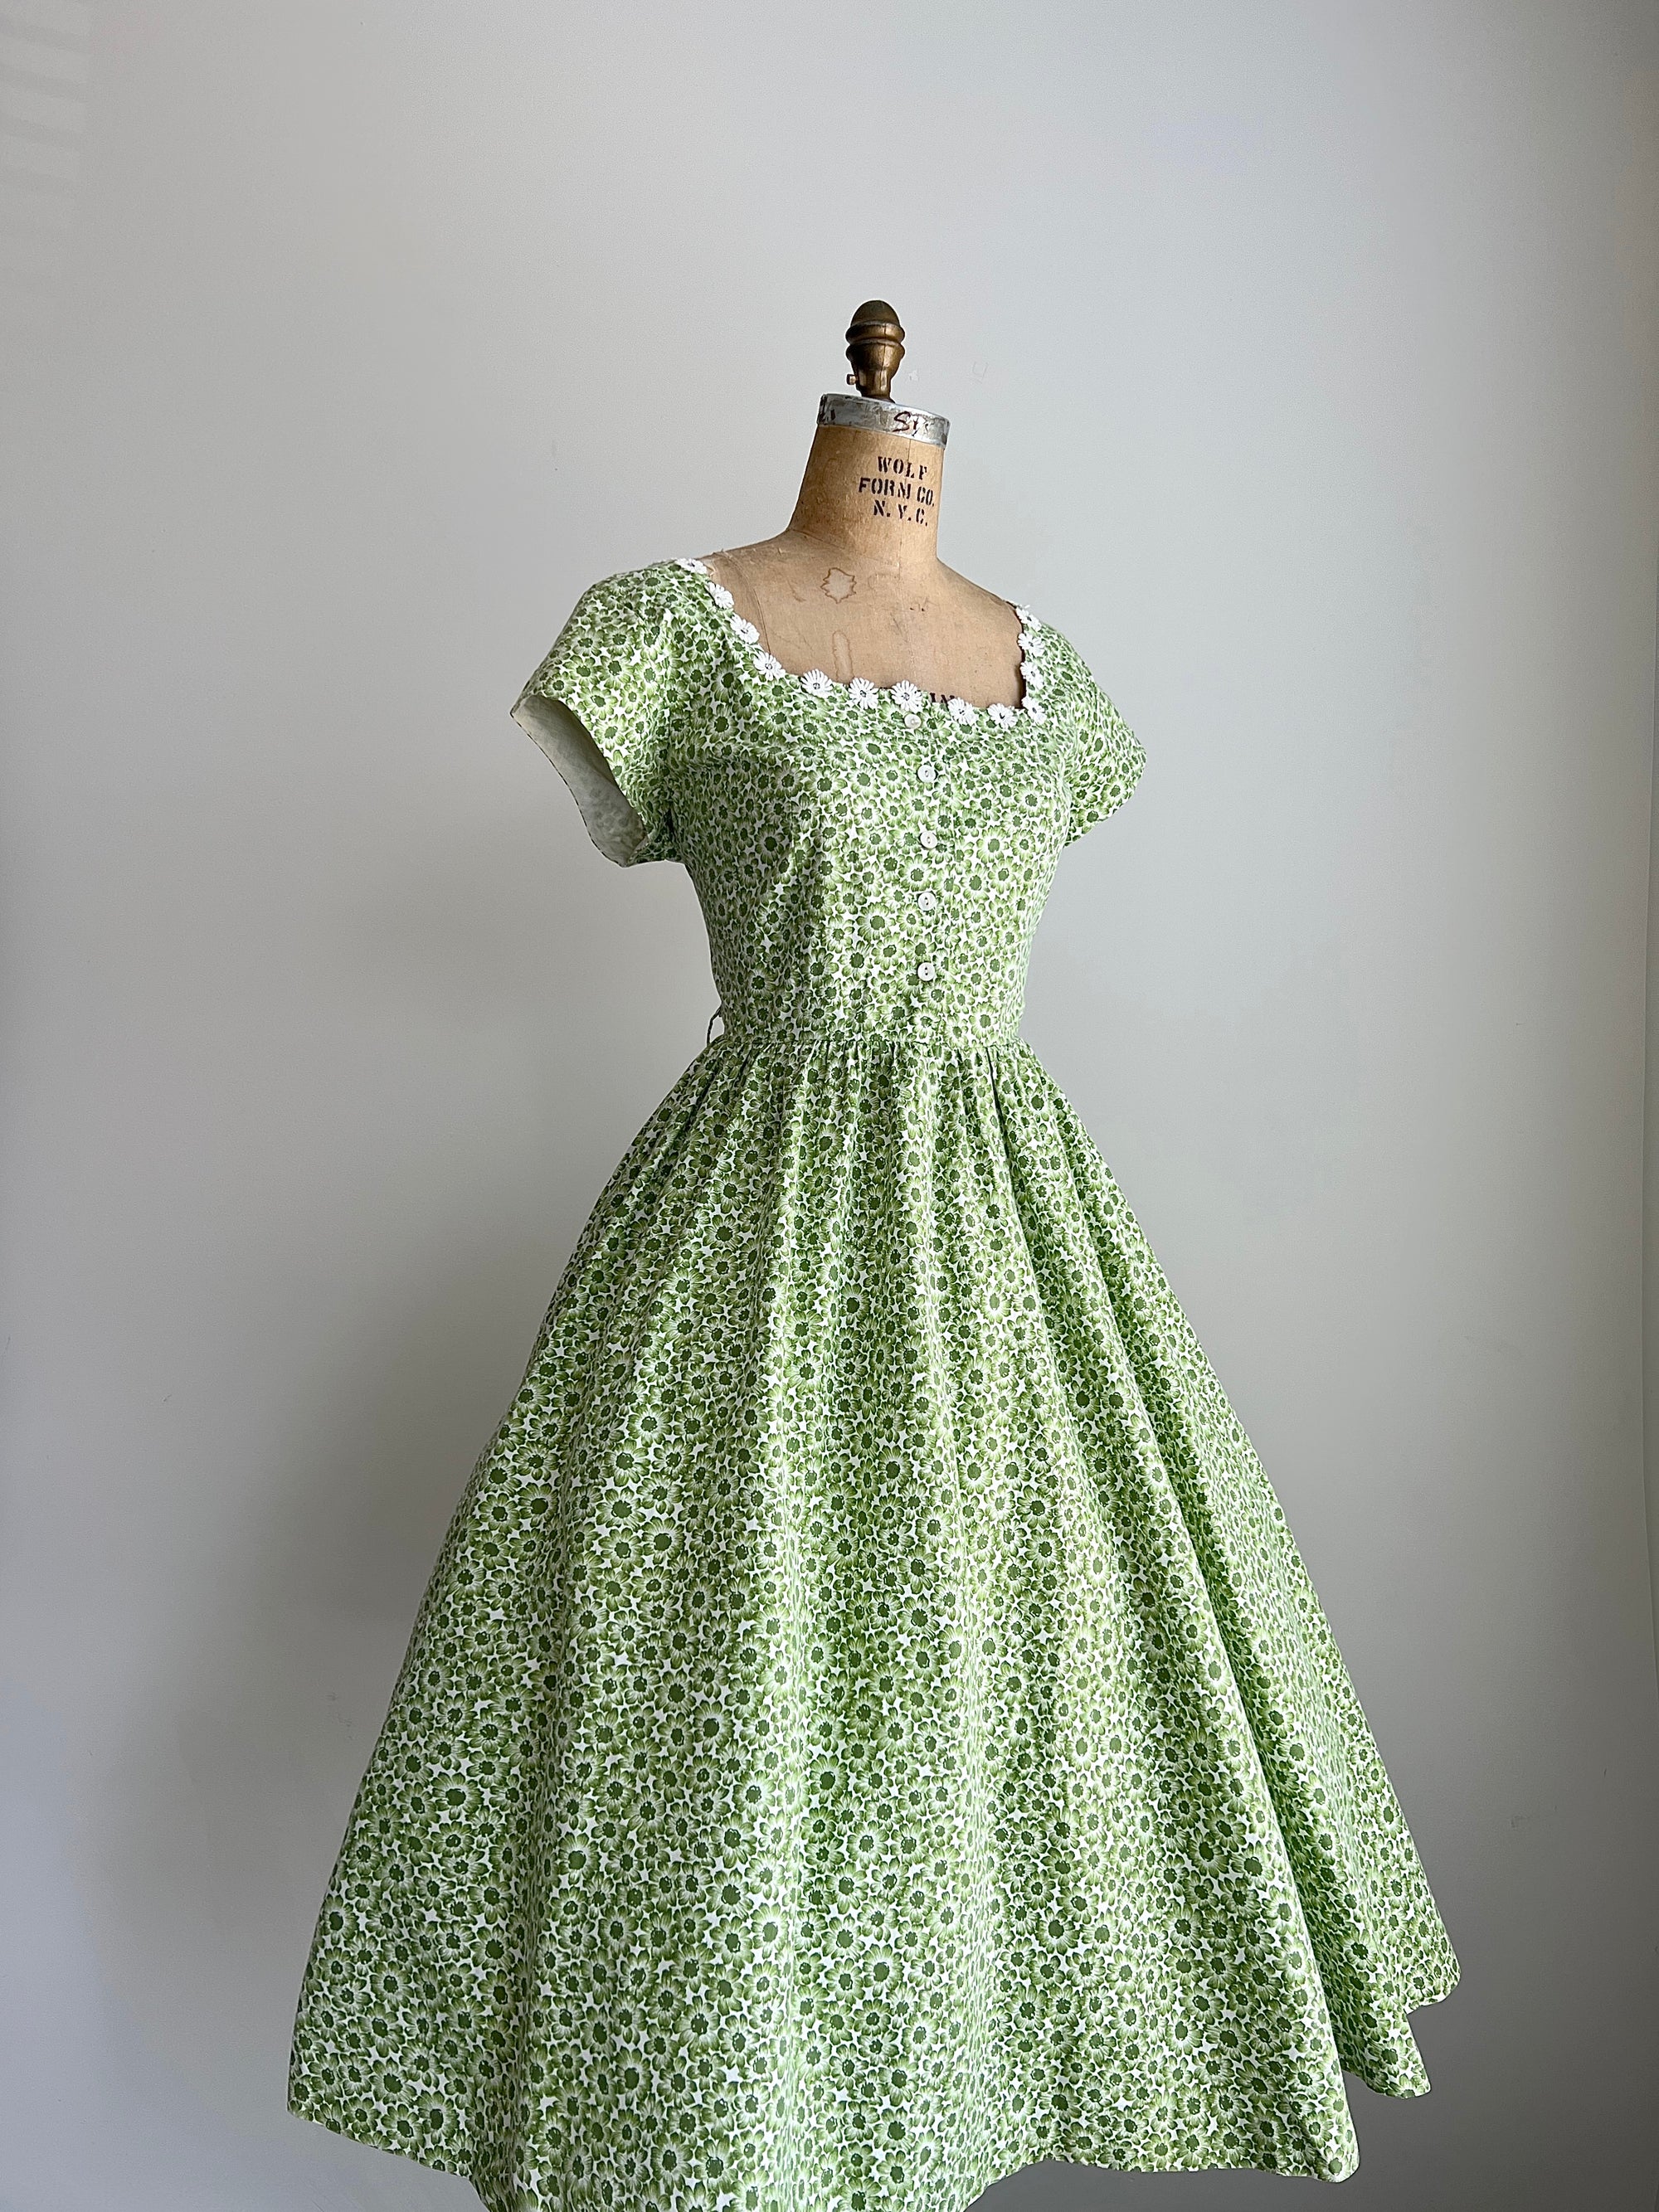 1950s Daisy Print Floral Green Cotton Dress / LARGE